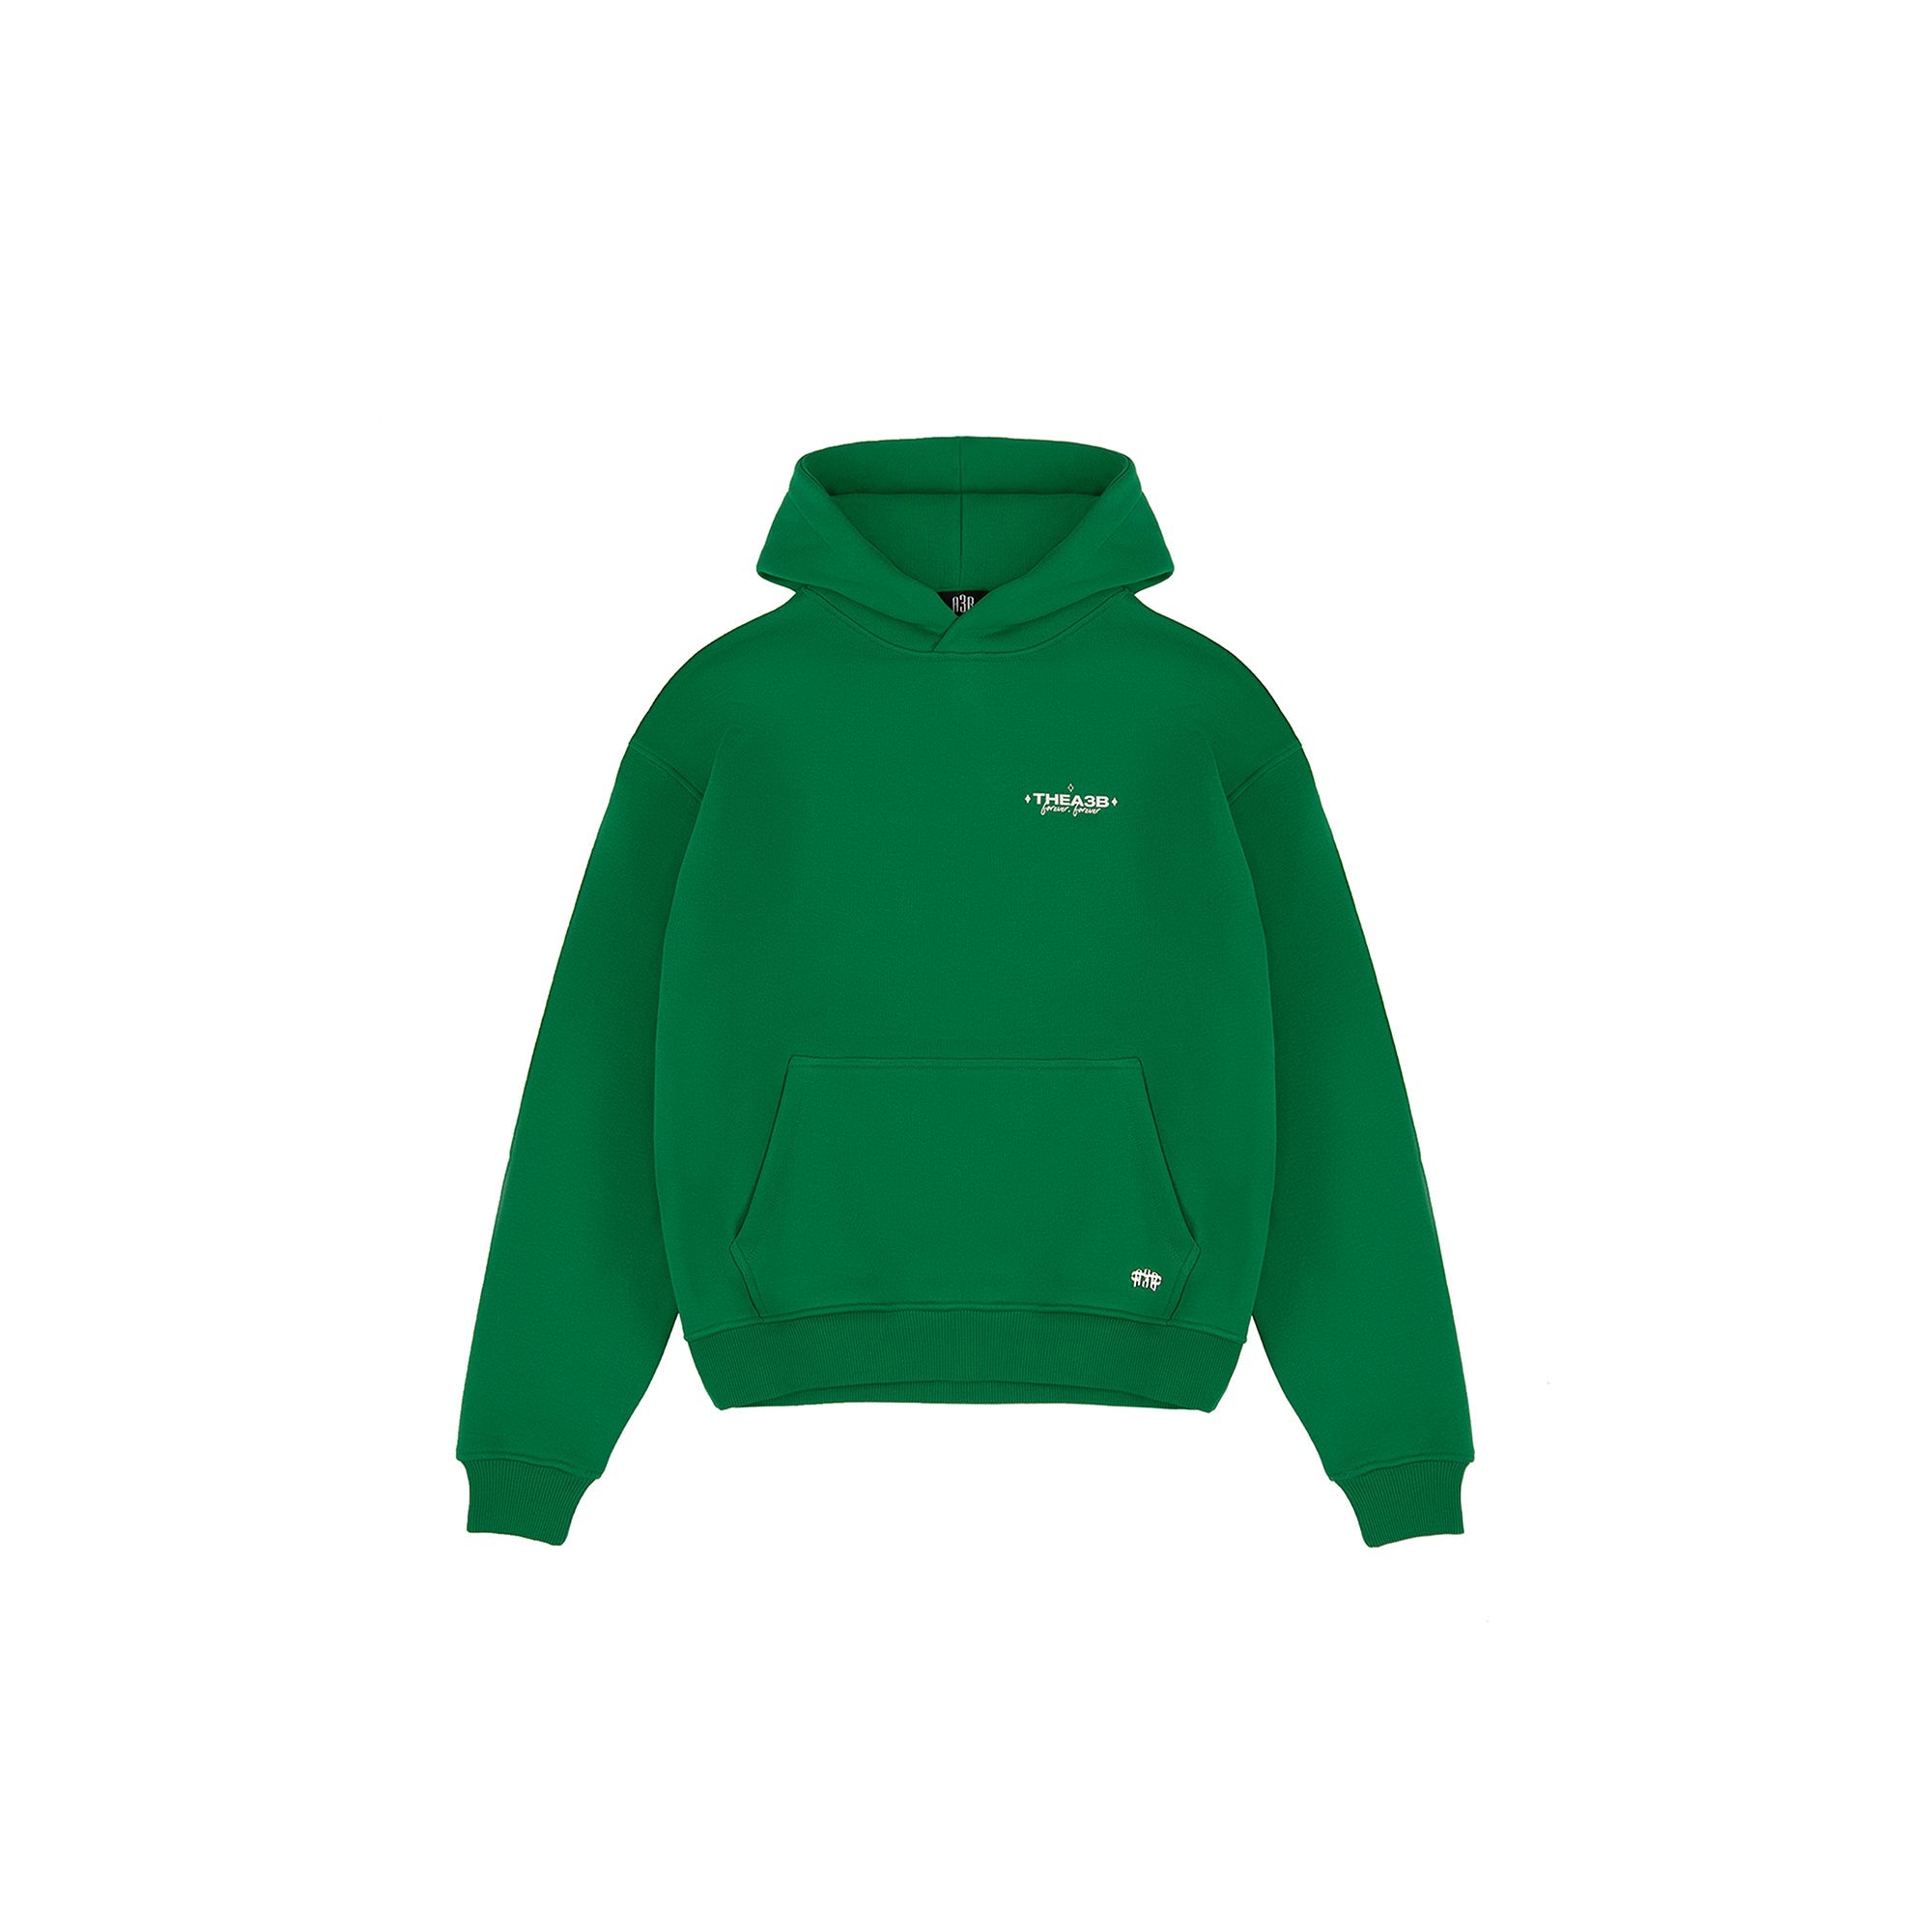 FOREVER, FOREVER HOODIE - GREEN - A3B